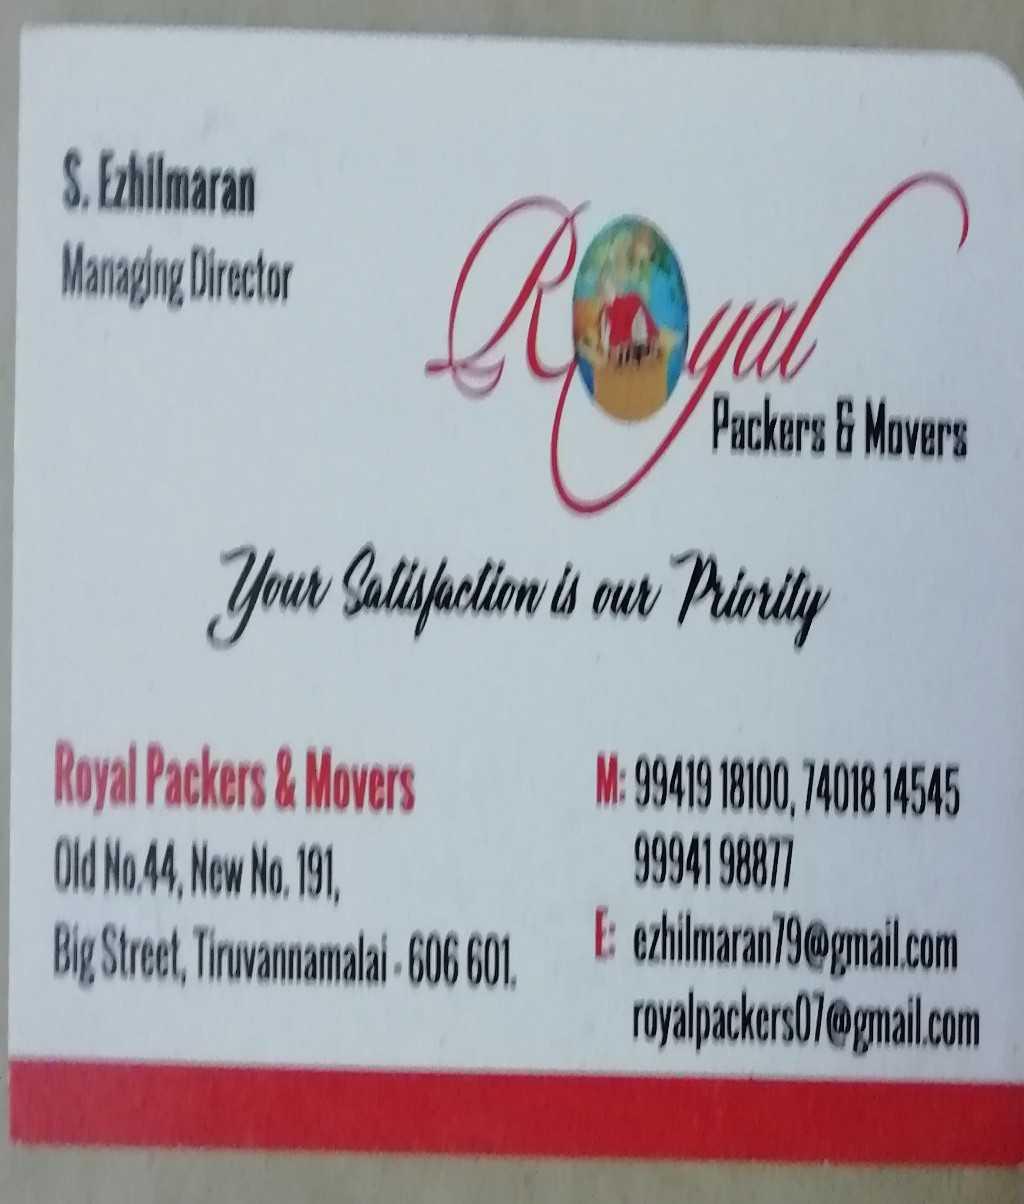 Royal Packers & Movers